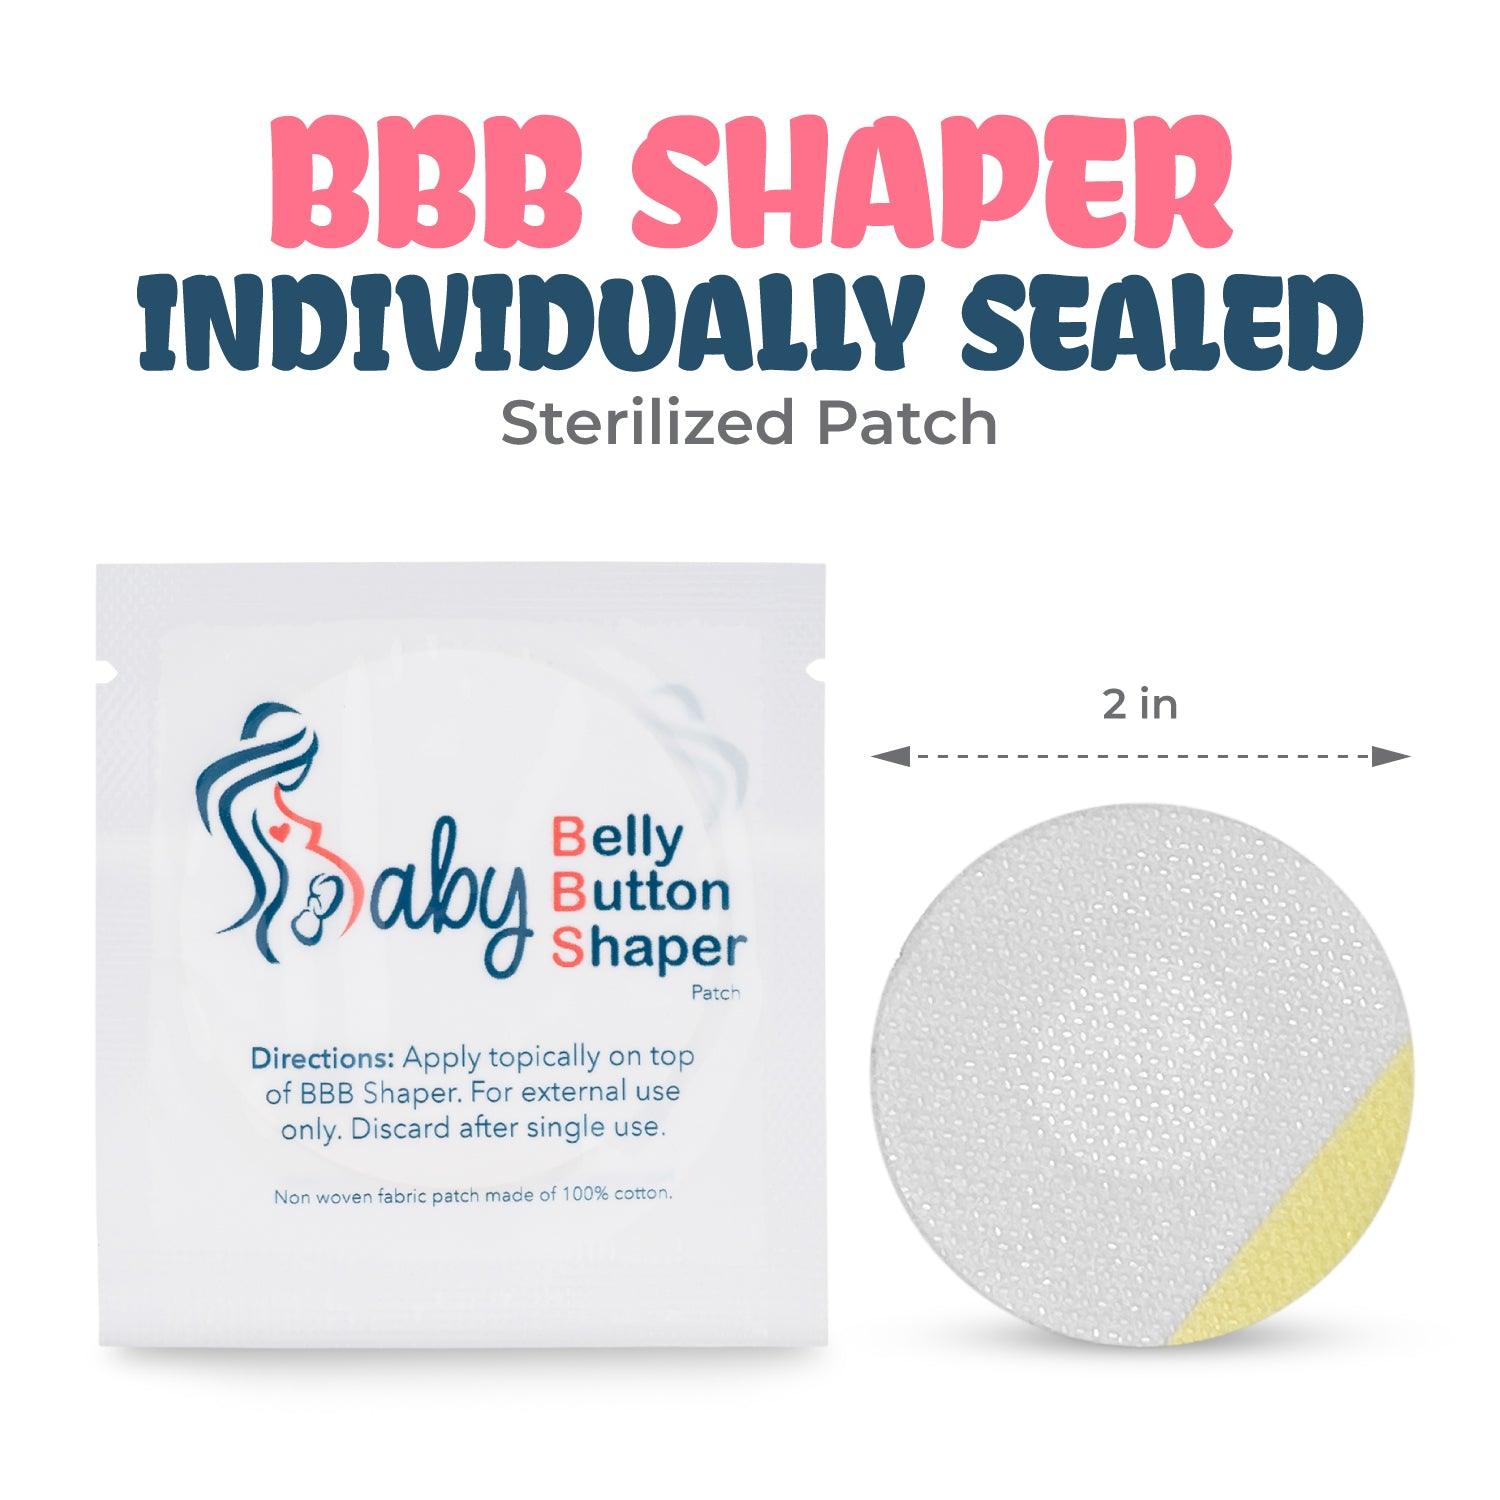 Baby Belly Button Shaper Patch Box 30 units|Baby First Aid Kit|Newborn  Umbilical Cord Care|Baby first aid kit newborn|large bandaids|Newborn  Medical